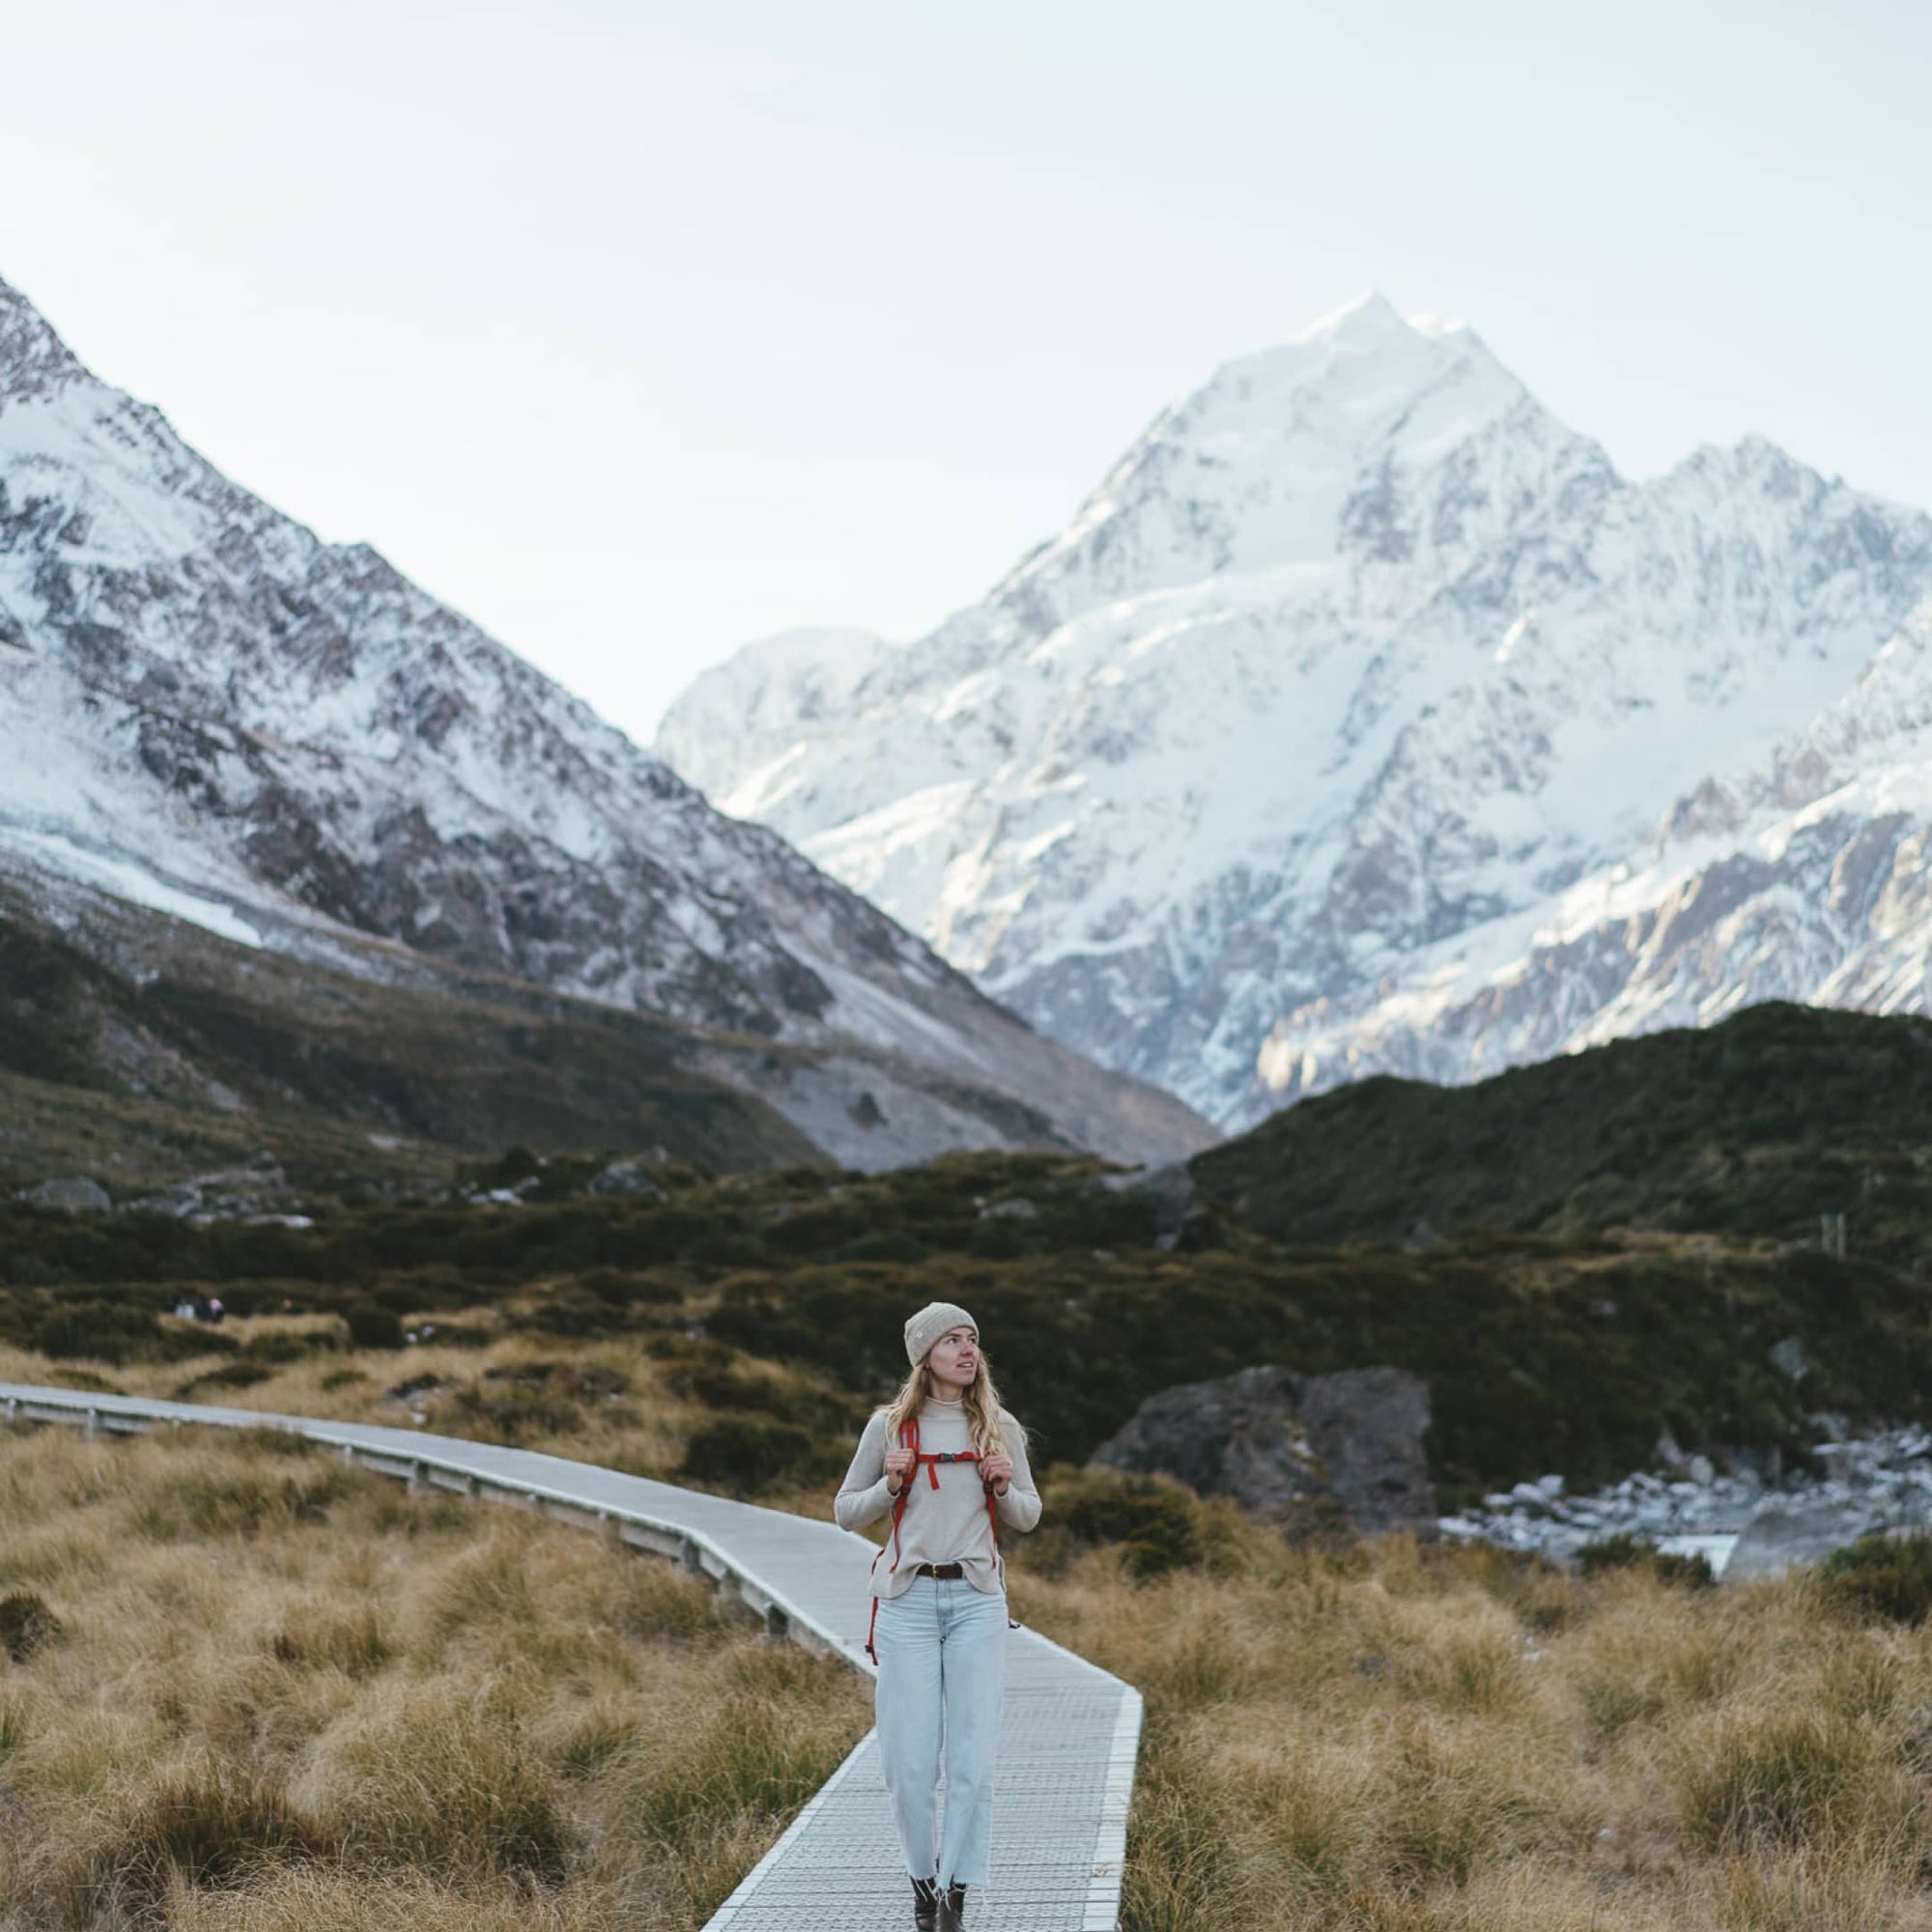 A woman hiking on a boardwalk through the Hooker Valley in New Zealand